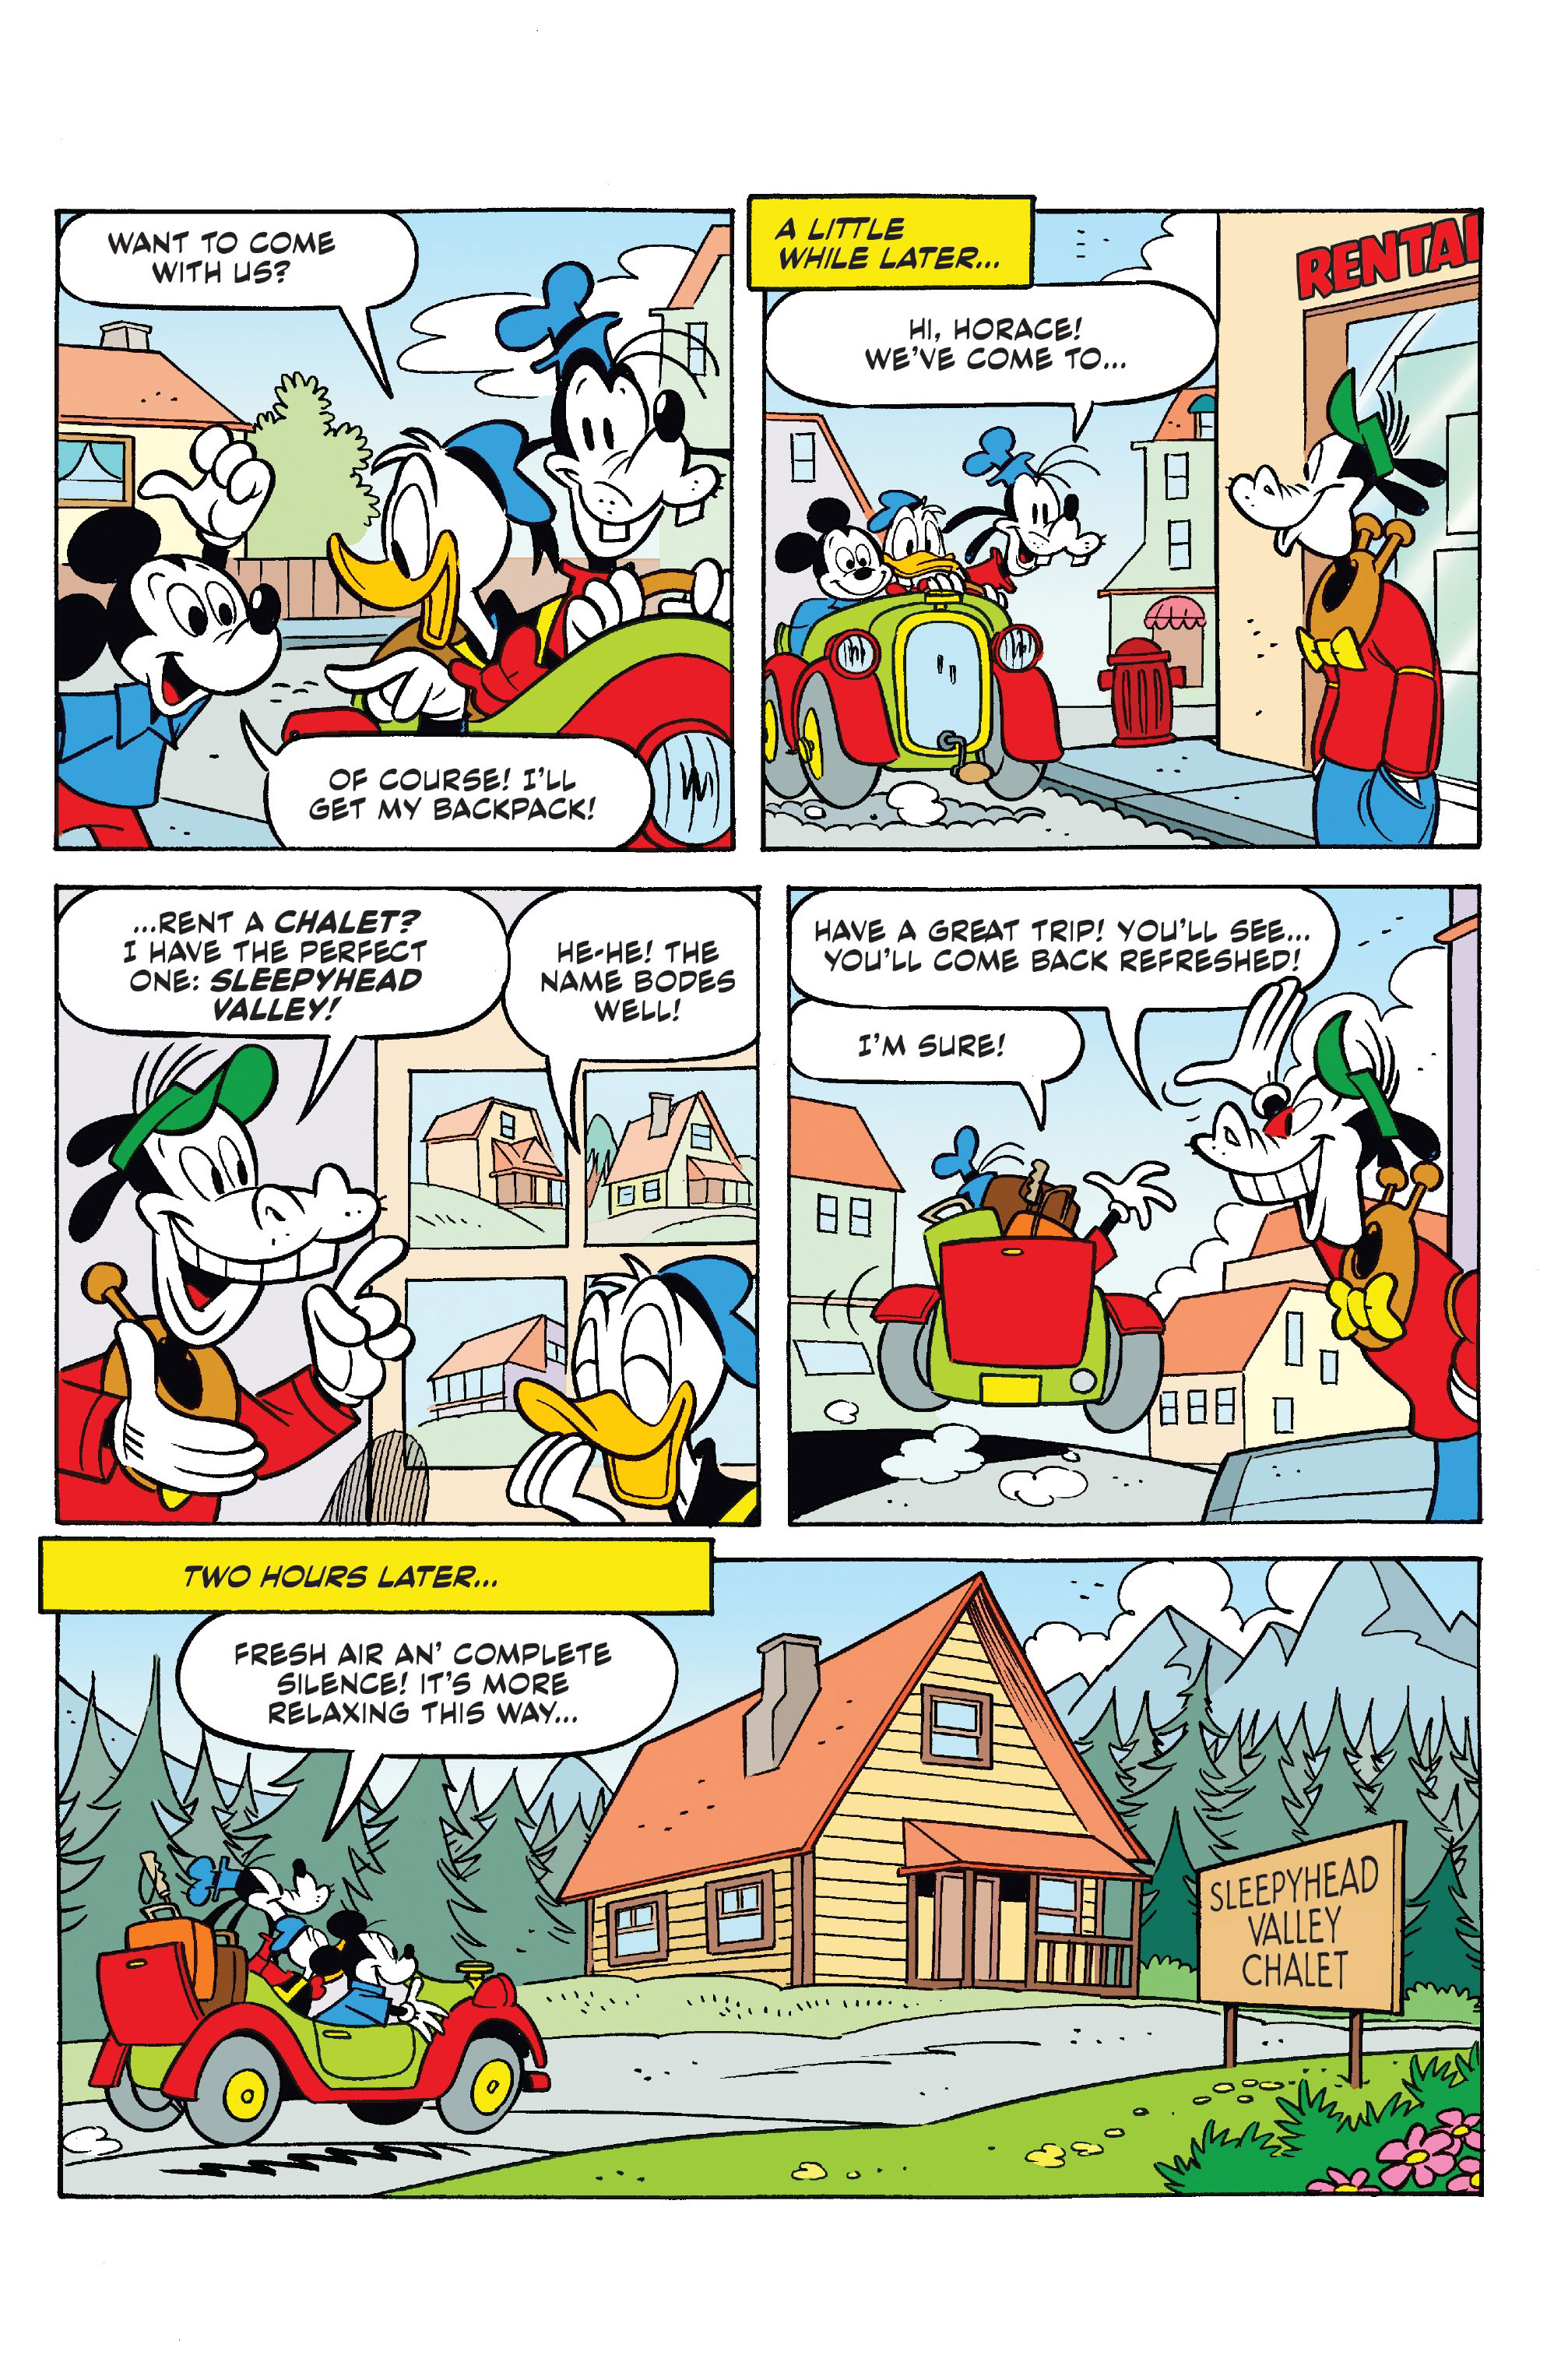 Disney Comics and Stories (2018-): Chapter 3 - Page 4